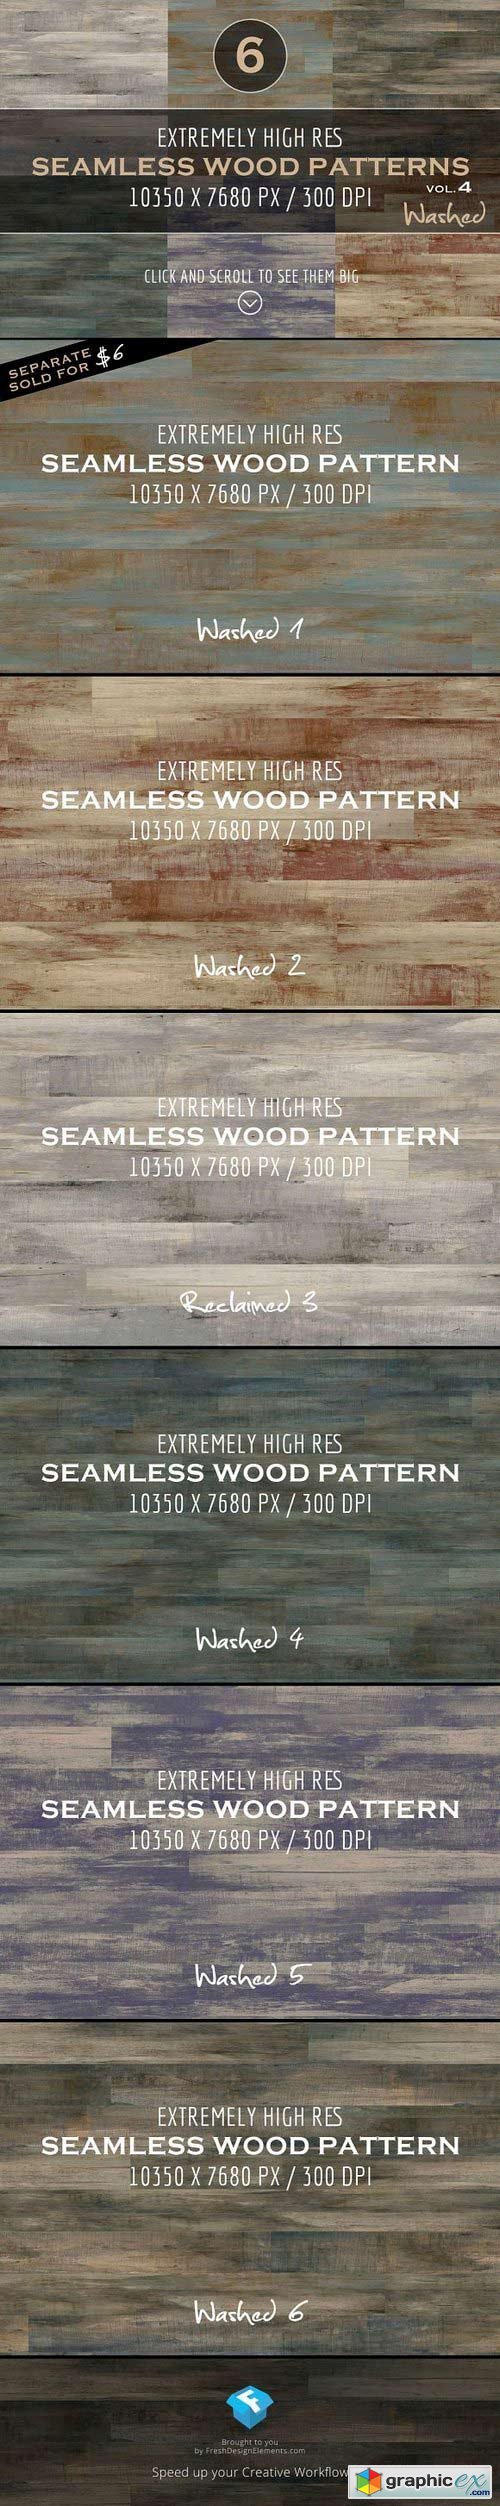 Extremely HR Wood Patterns vol. 4